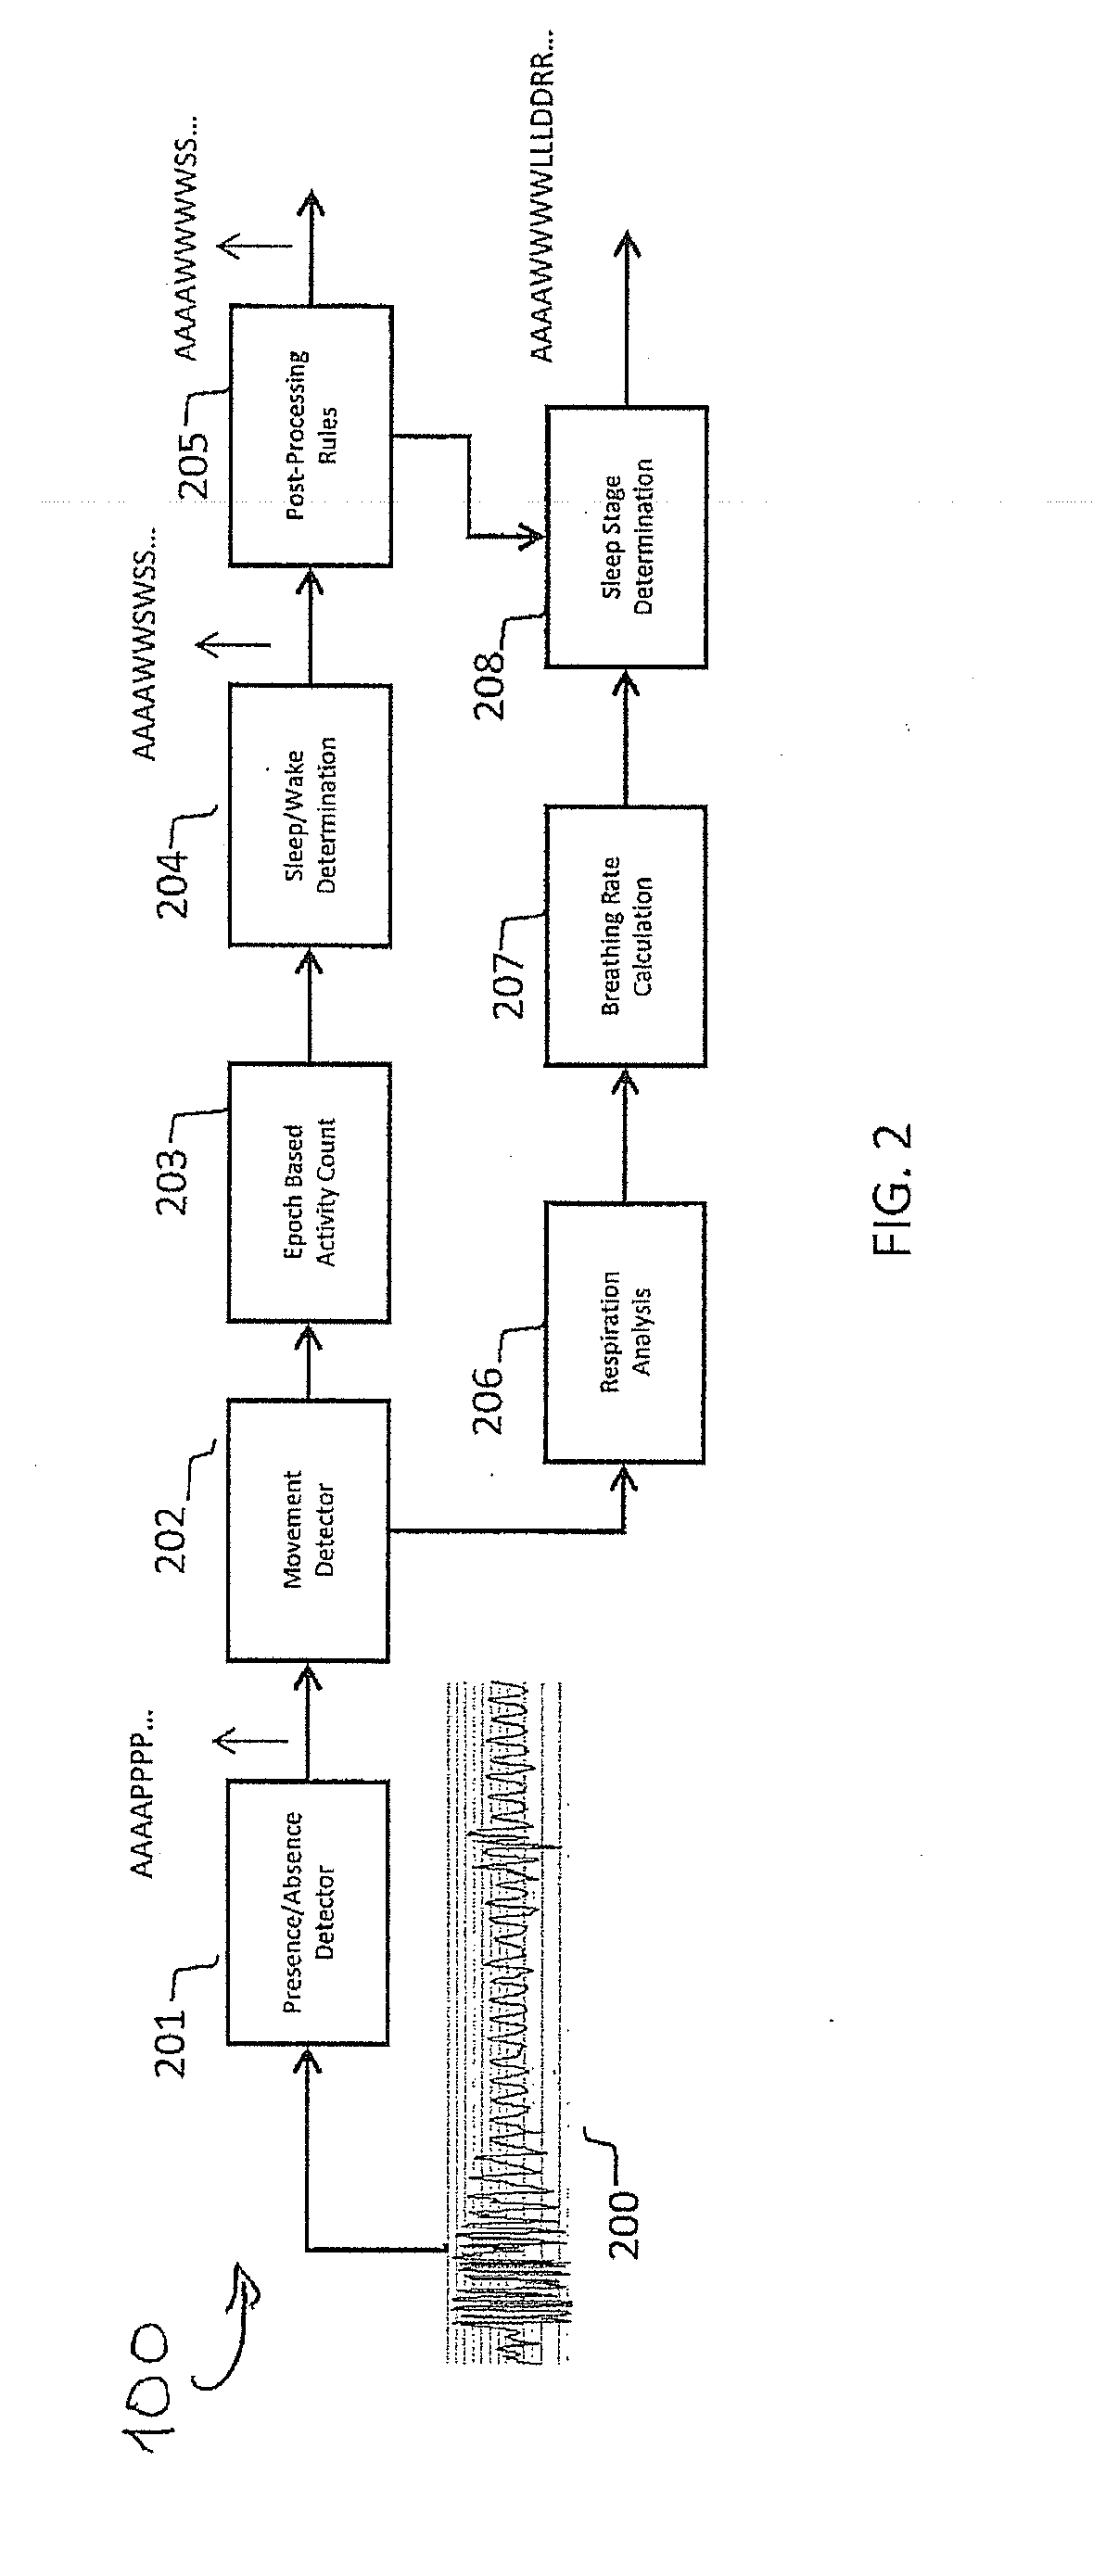 System and method for determining sleep stage